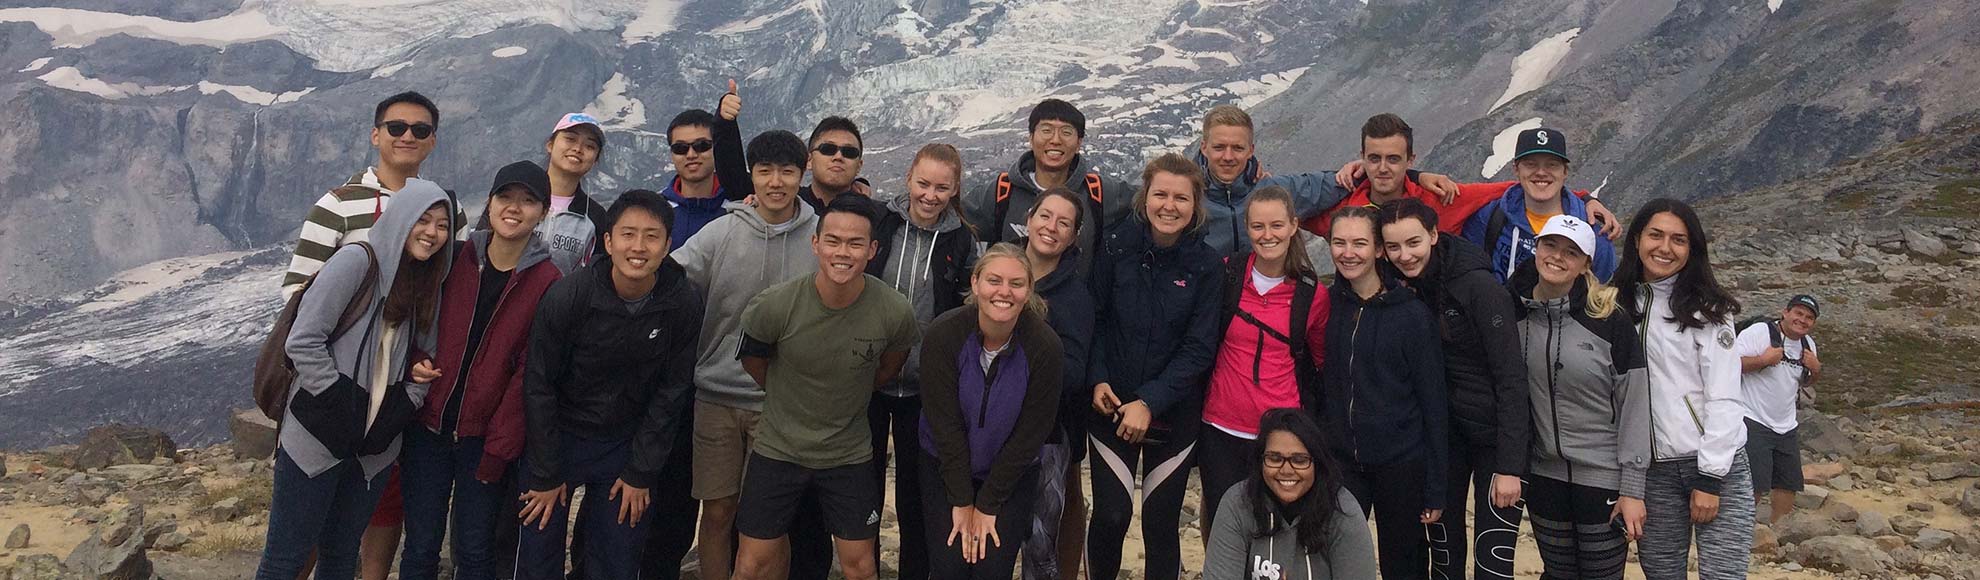 PLU International students posing for a group photo while on a hike up Mt. Rainier in Washington State